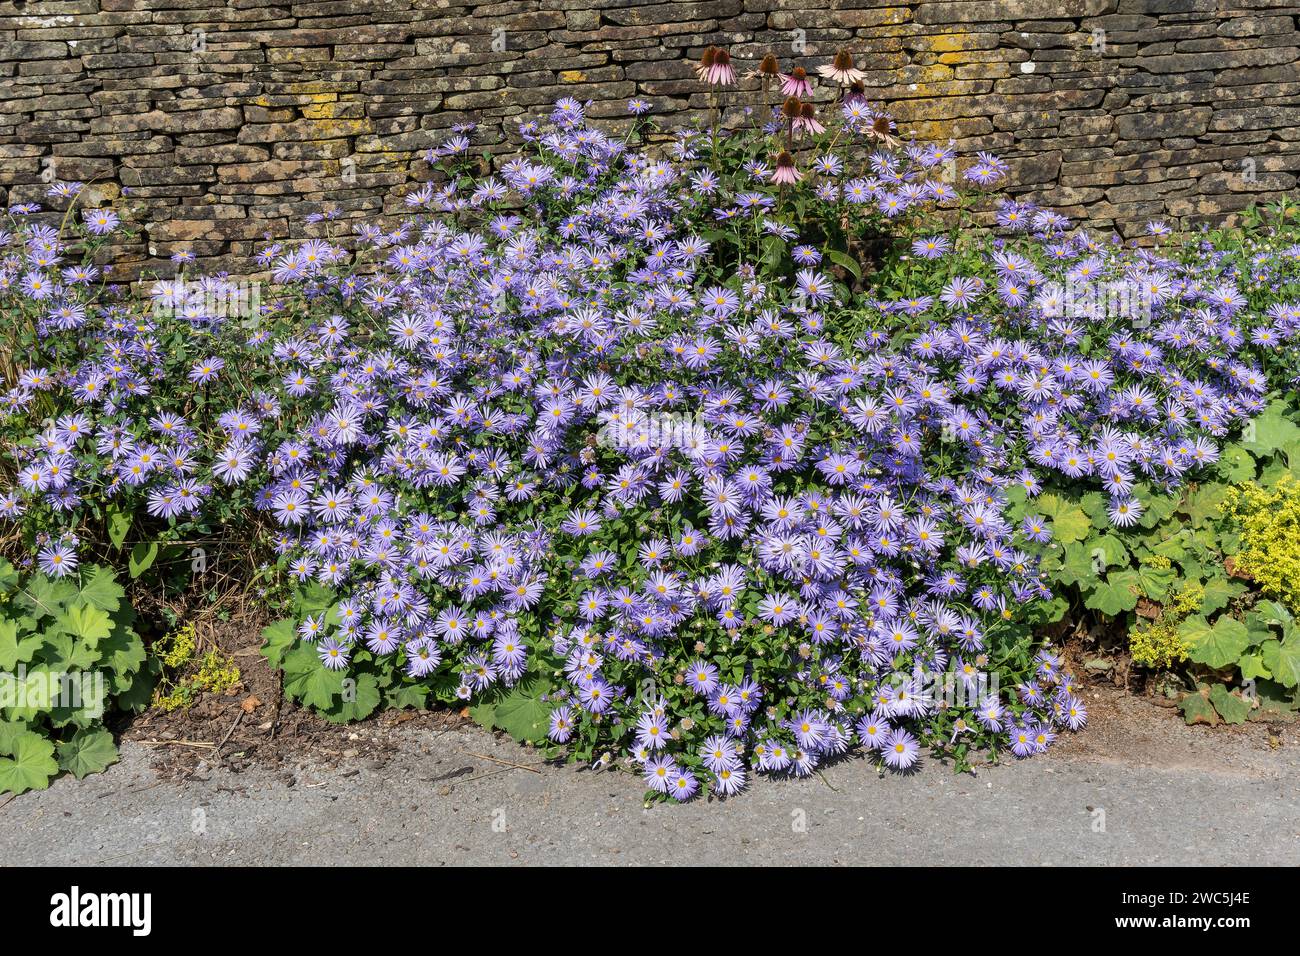 Aster x frikartii 'Monch' a lavender blue herbaceous perennial summer autumn flower plant commonly known as Michaelmas daisy, stock photo image Stock Photo